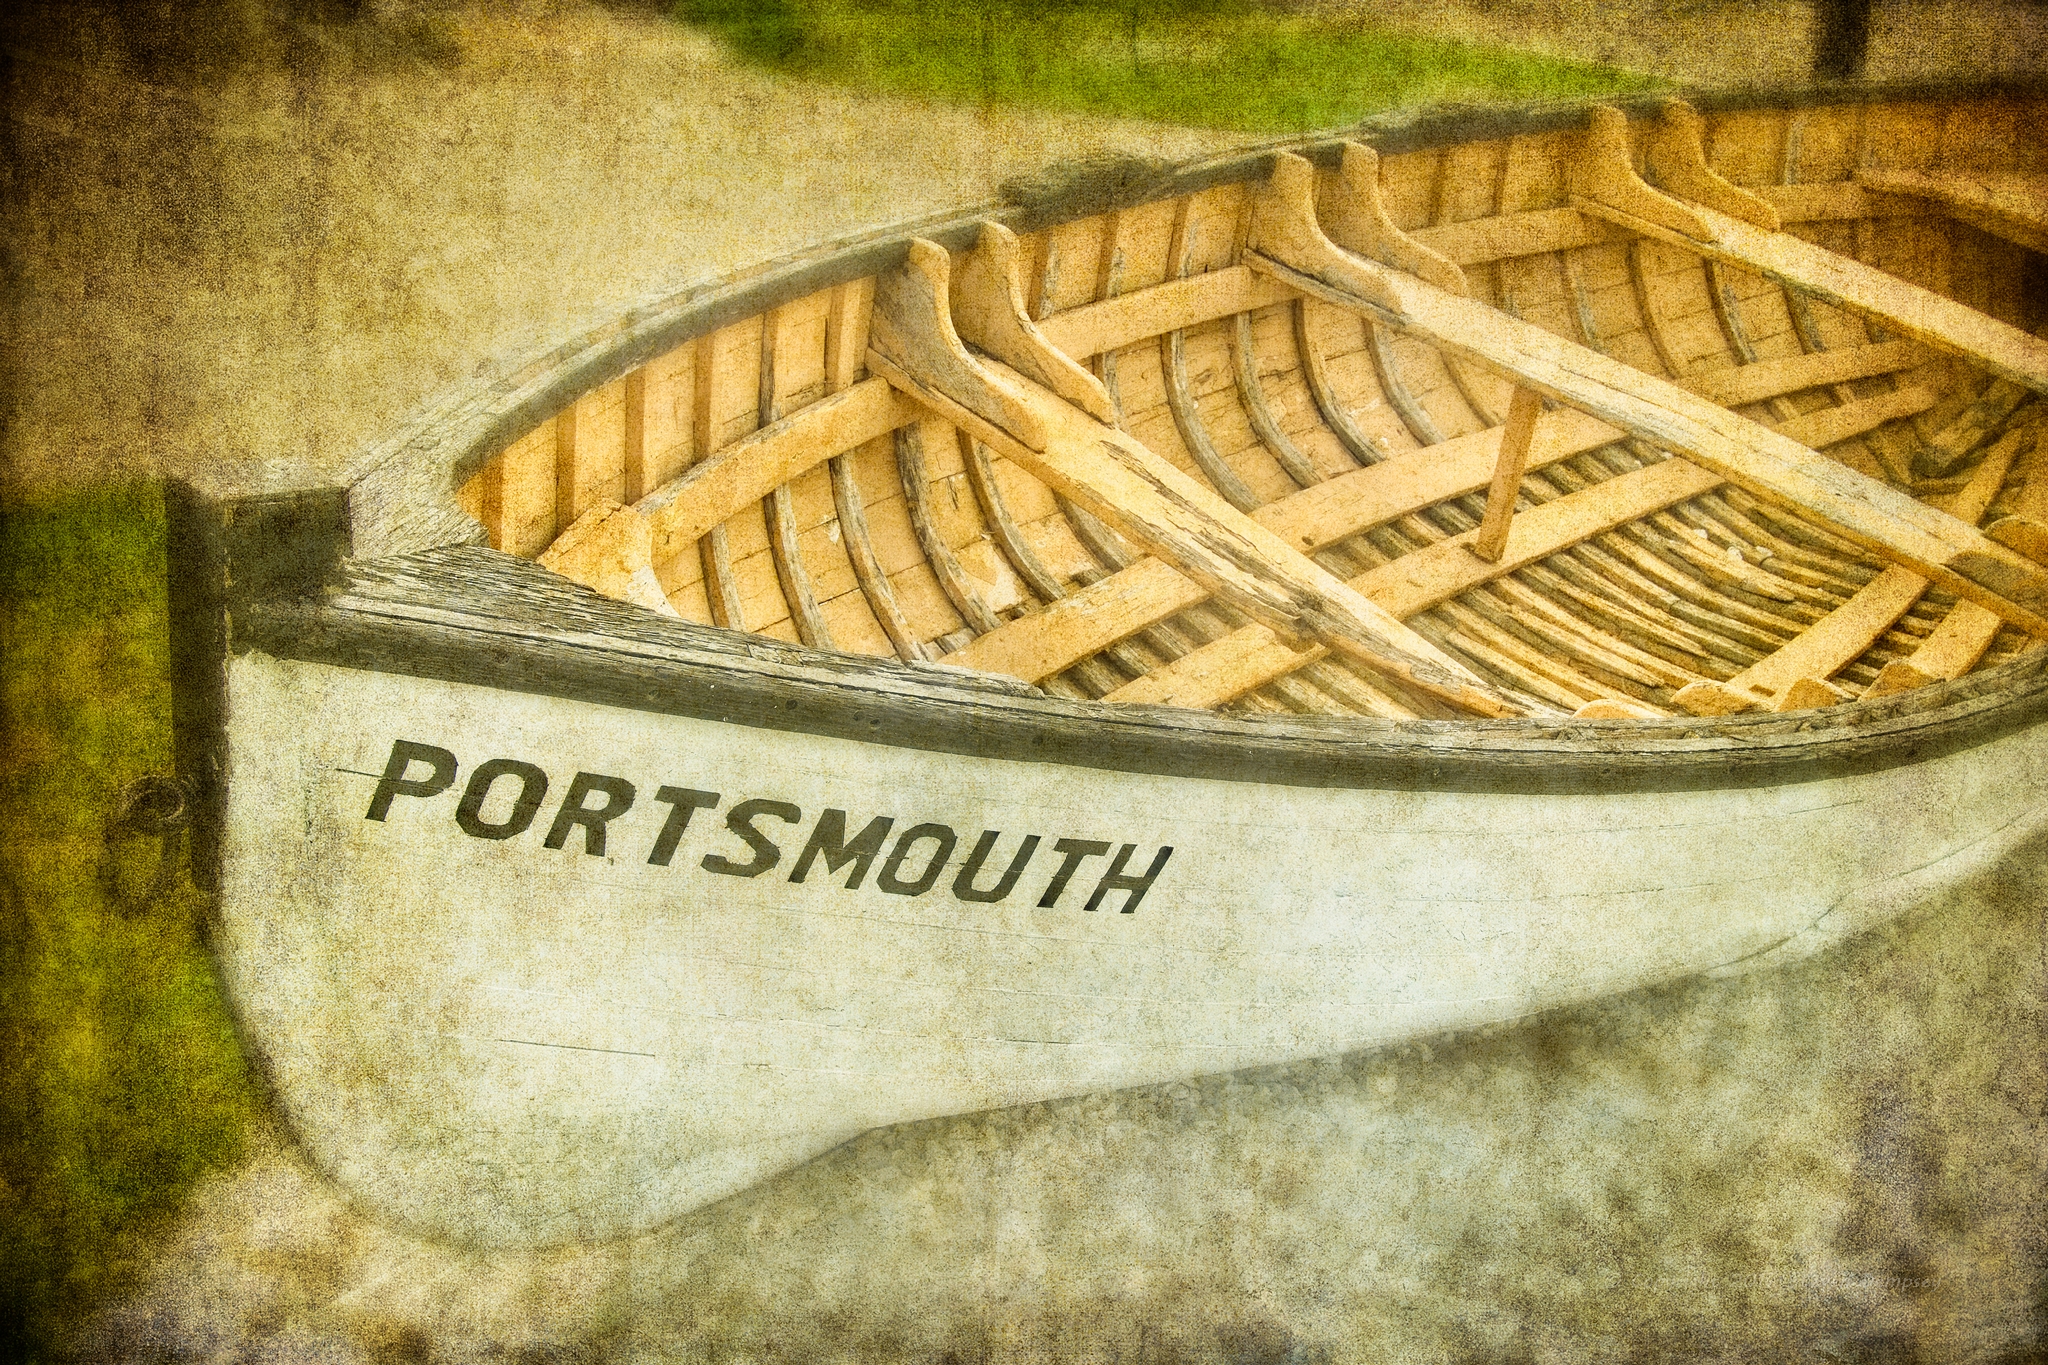 The Portsmouth